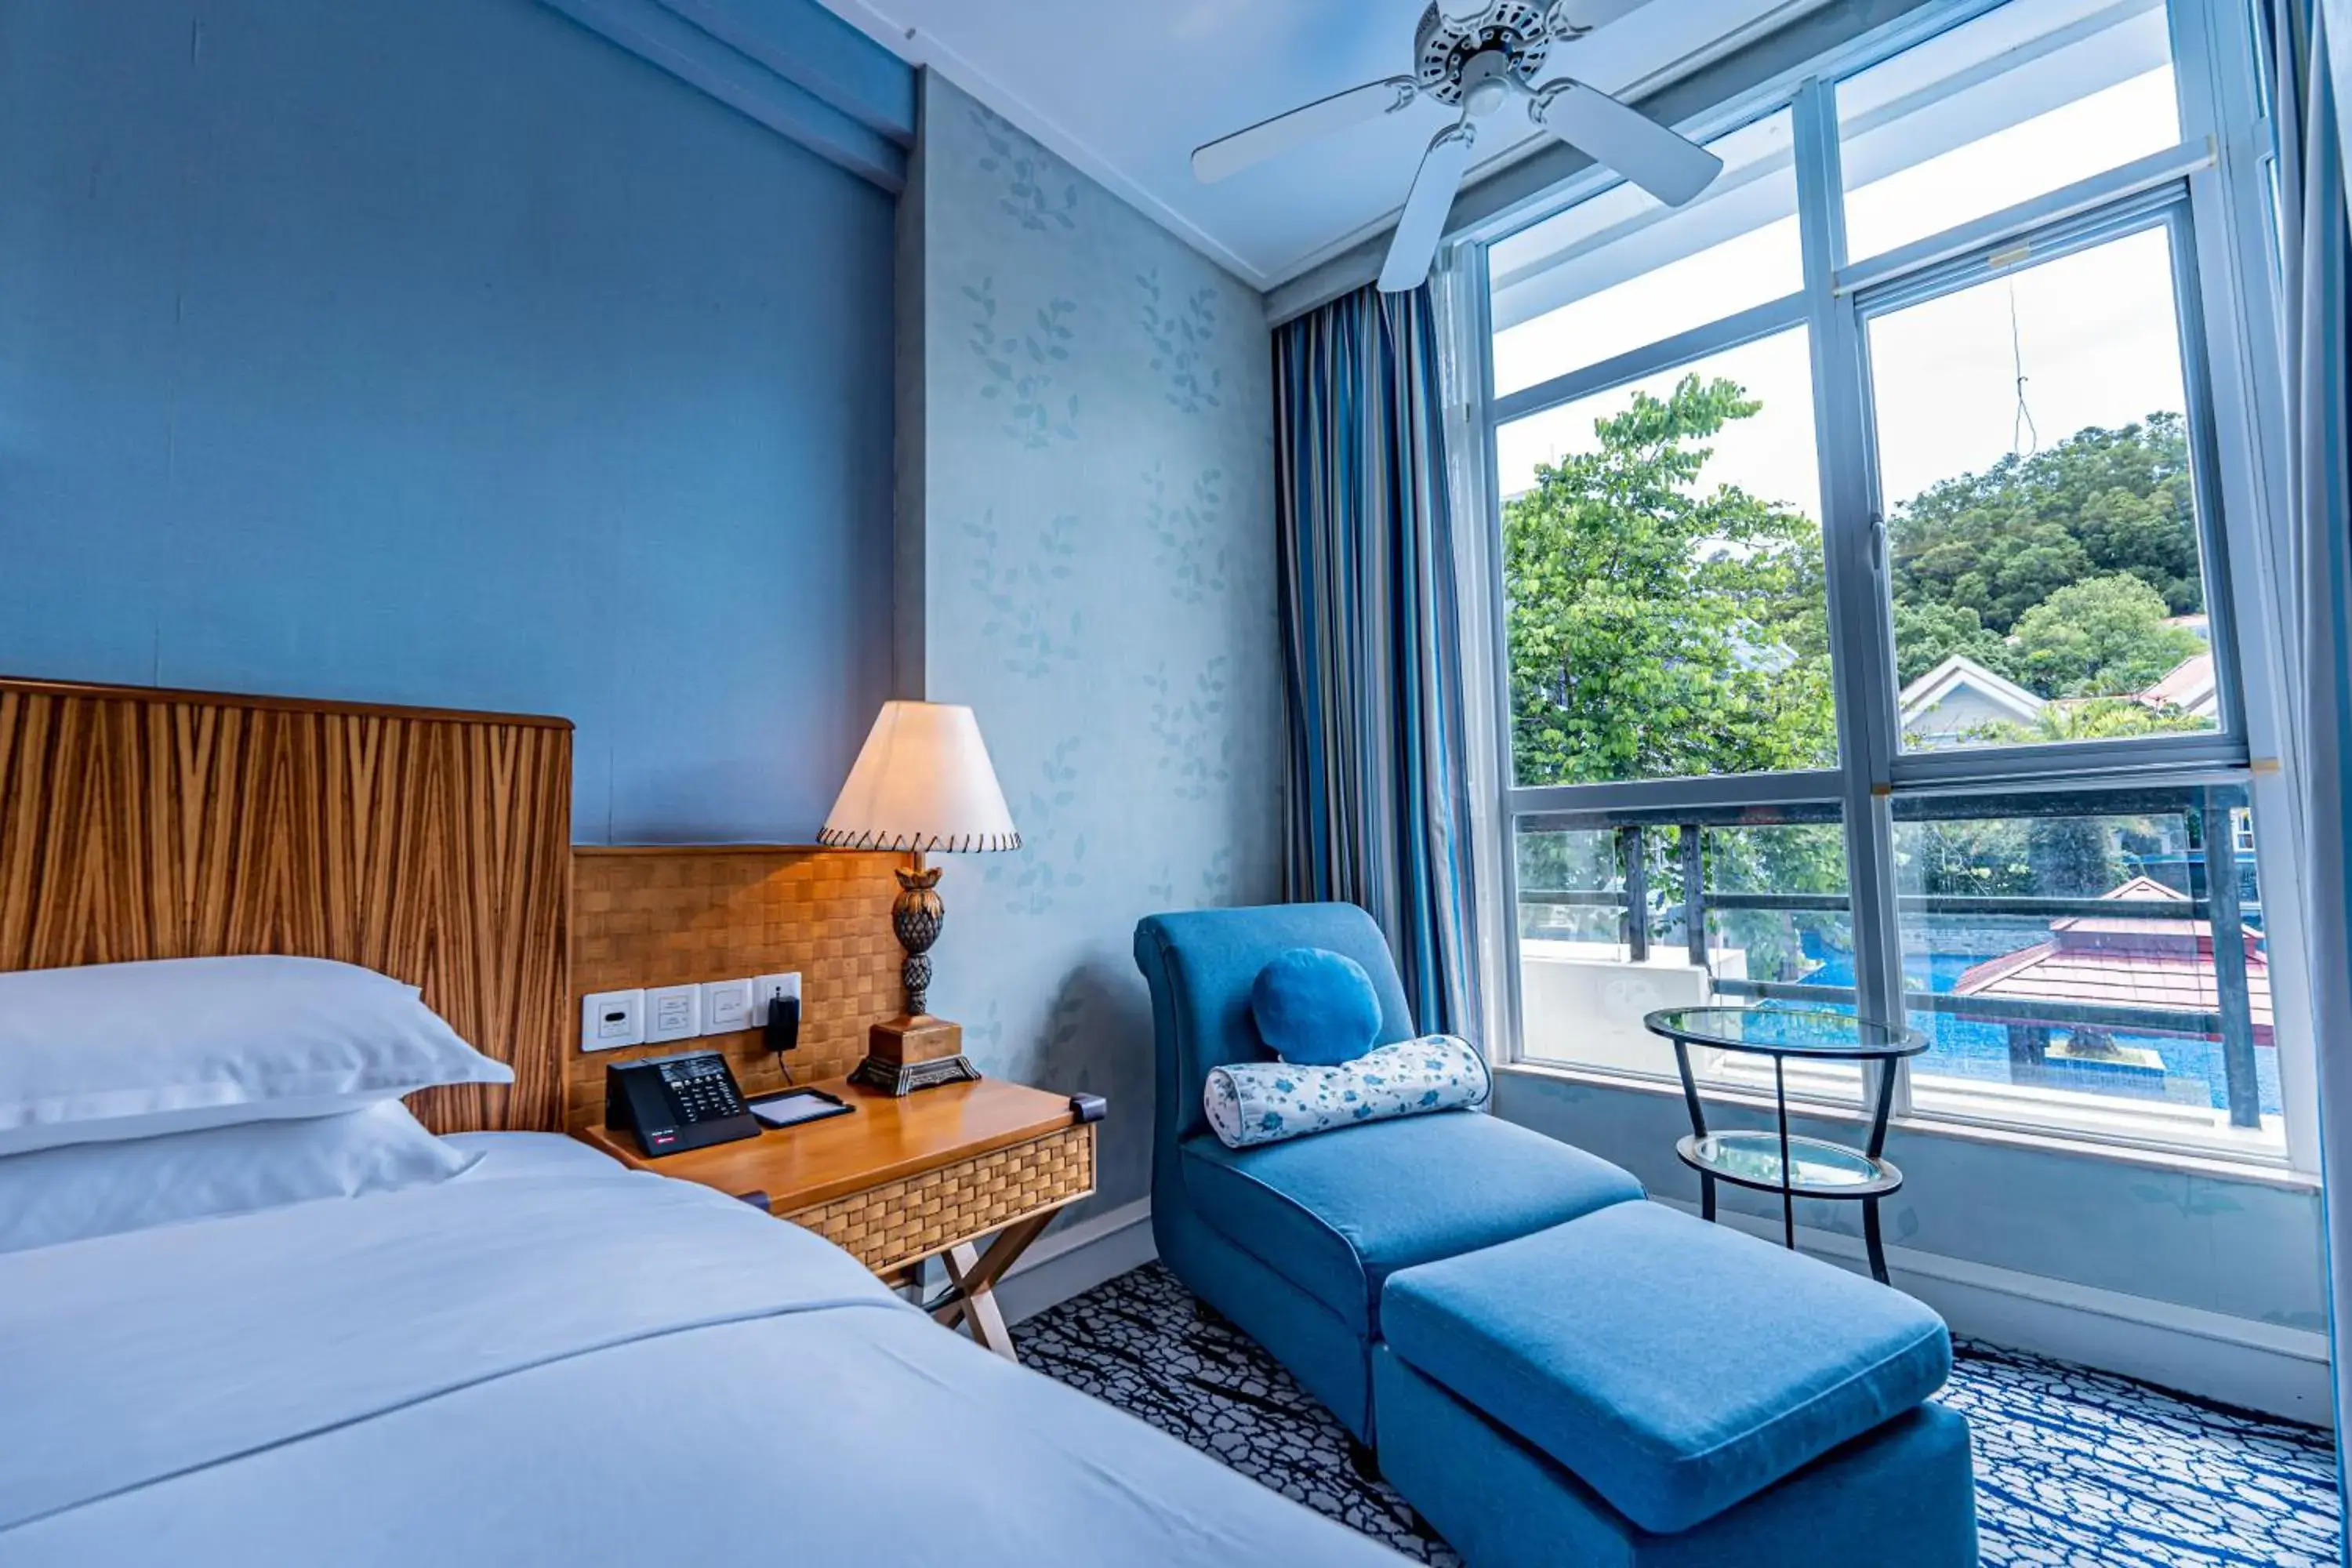 Bed in Goodview Hotel Sangem Tangxia